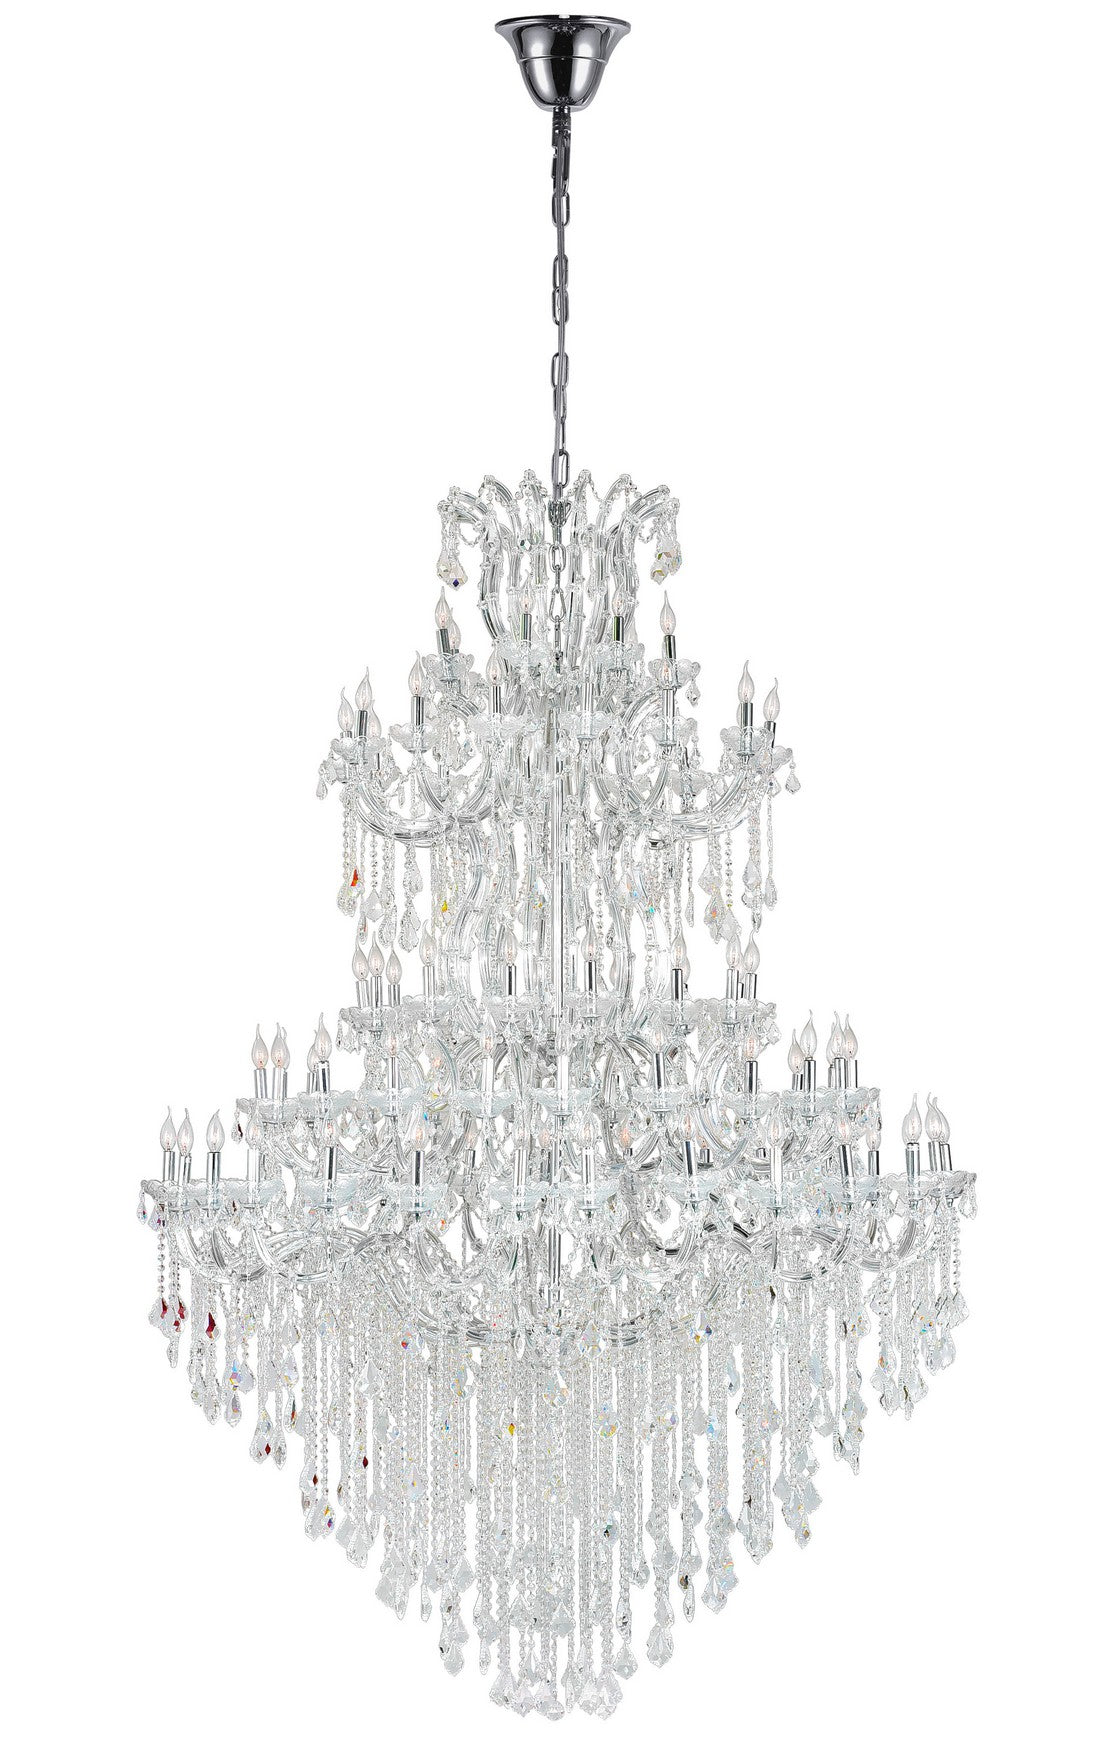 84 LIGHT UP CHANDELIER WITH CHROME FINISH - Dreamart Gallery